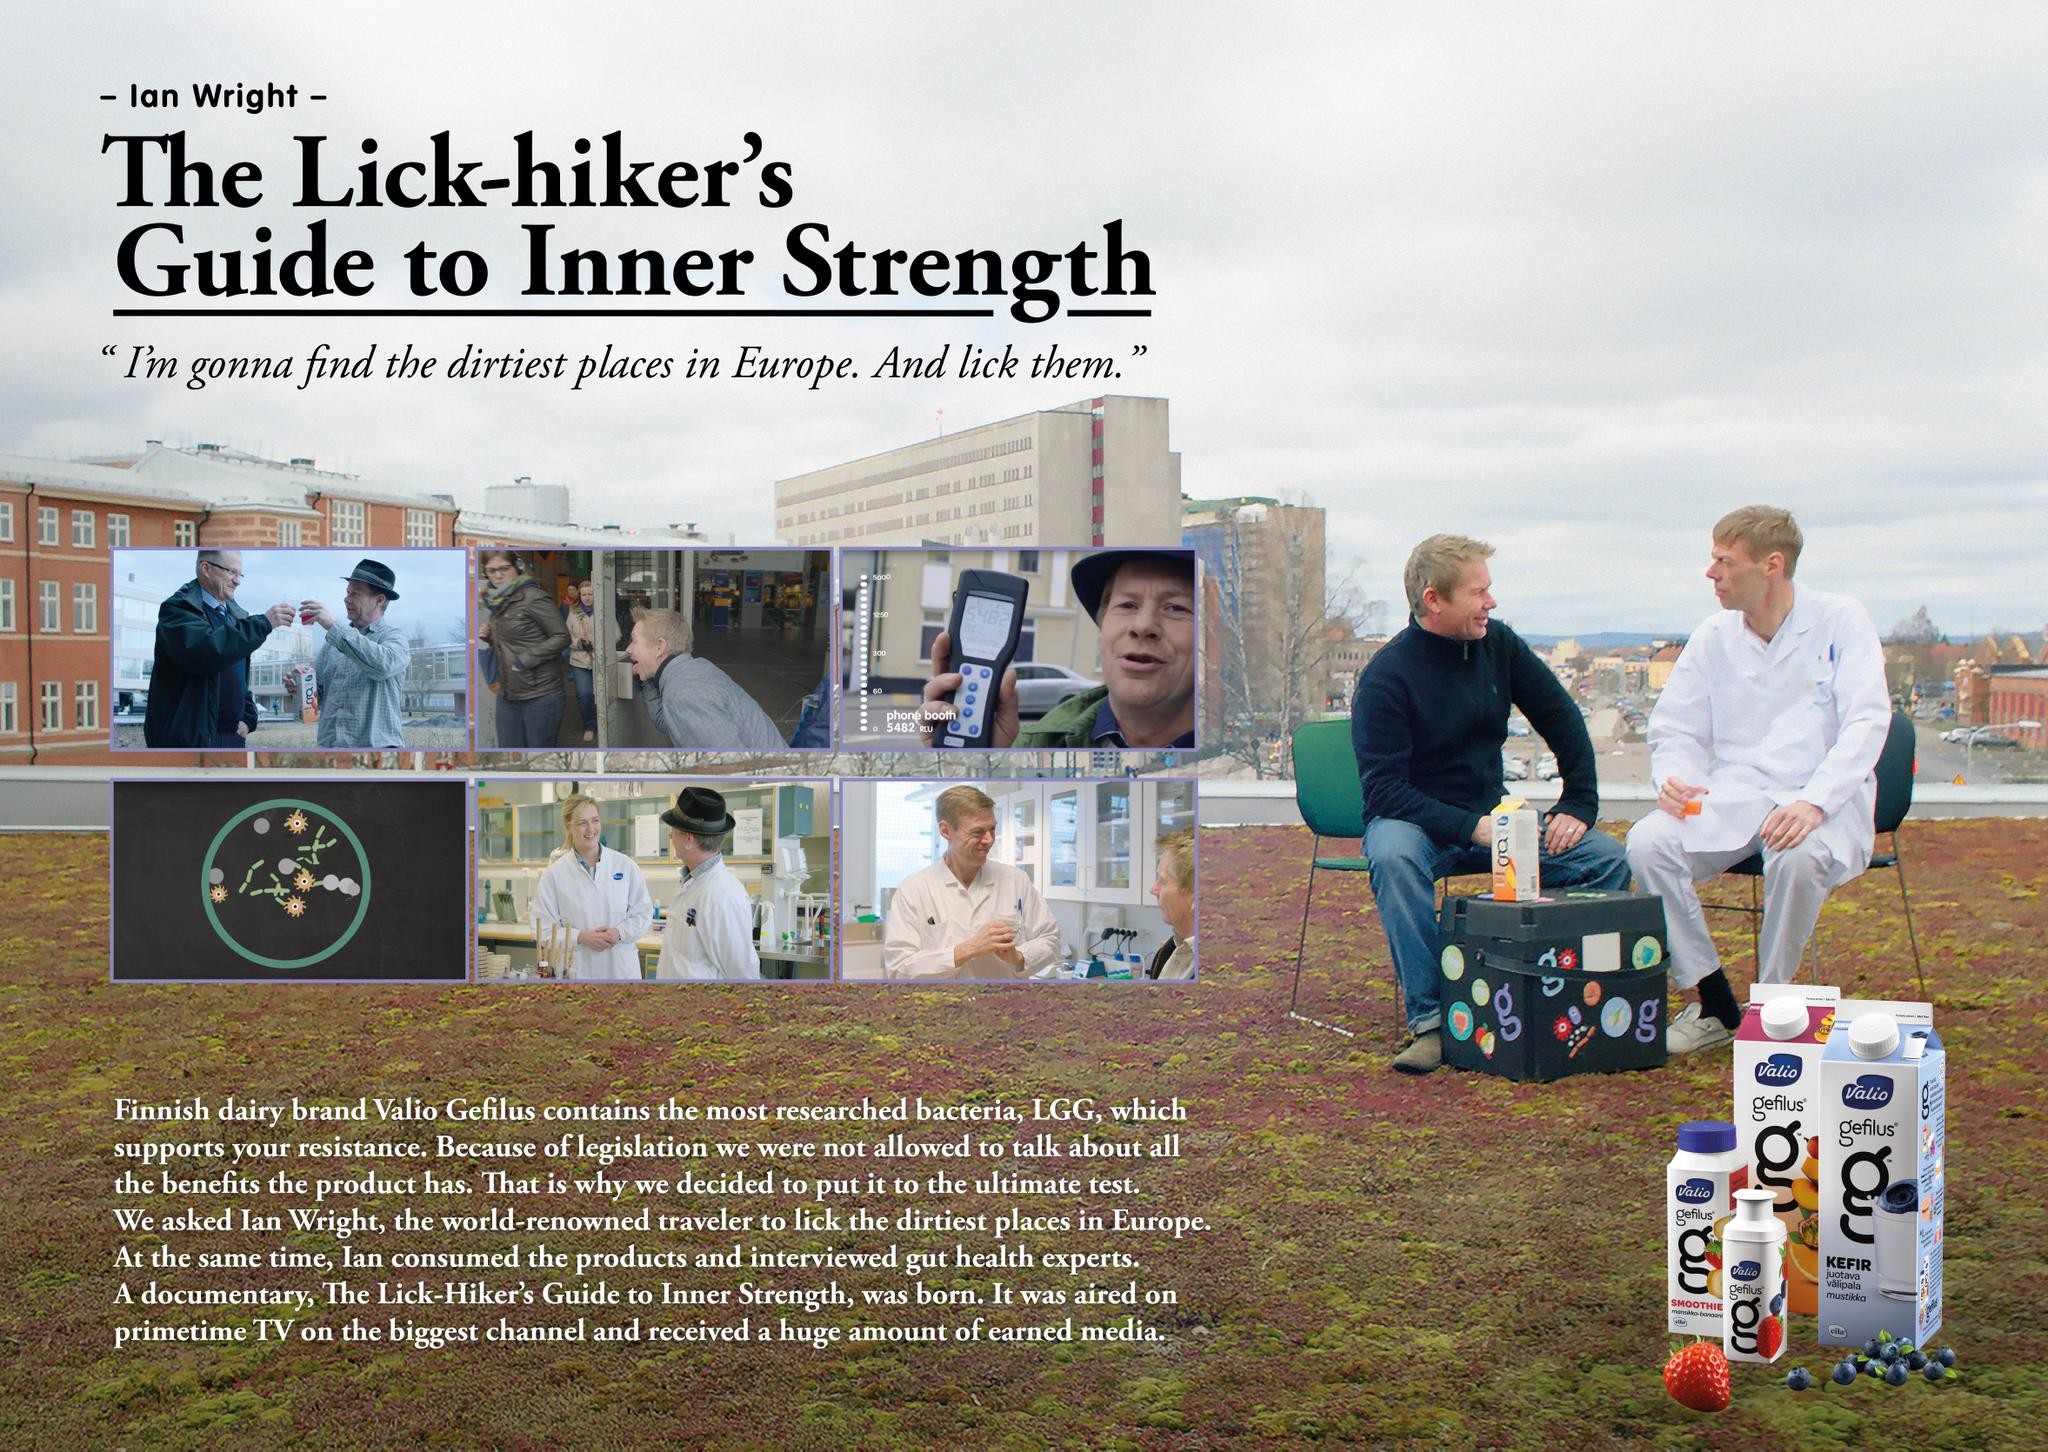 The lick-hiker's guide to inner strength